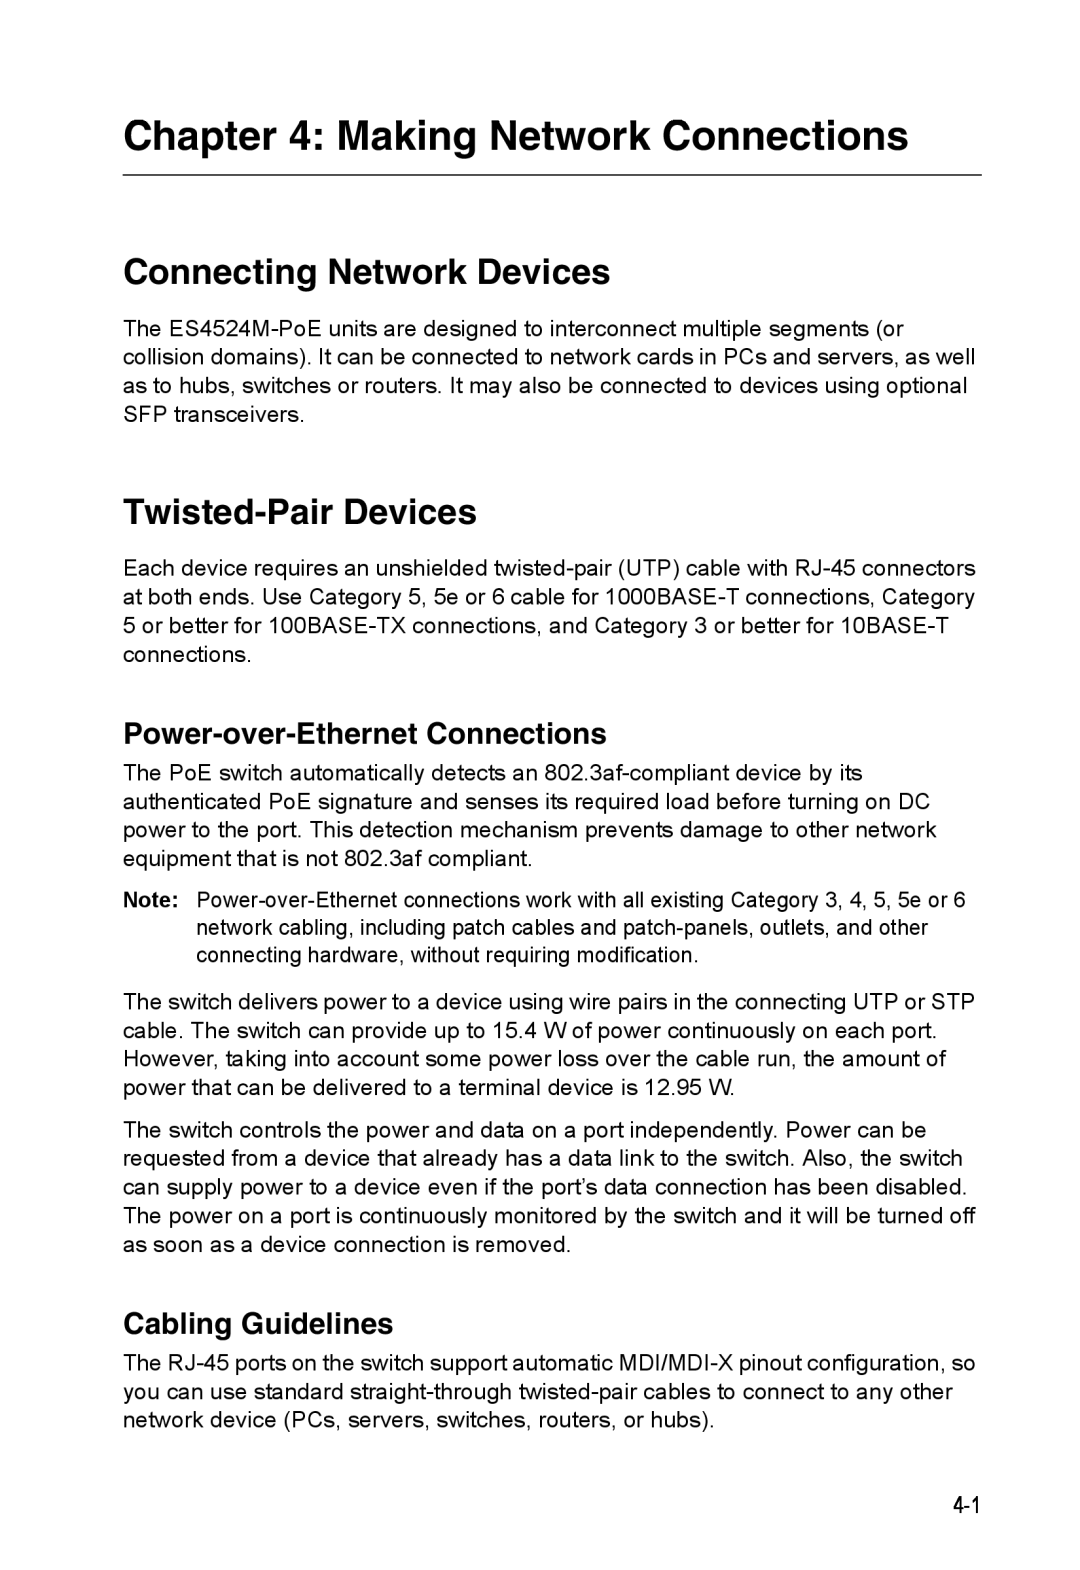 Accton Technology ES4524M-POE manual Making Network Connections, Connecting Network Devices, Twisted-Pair Devices 